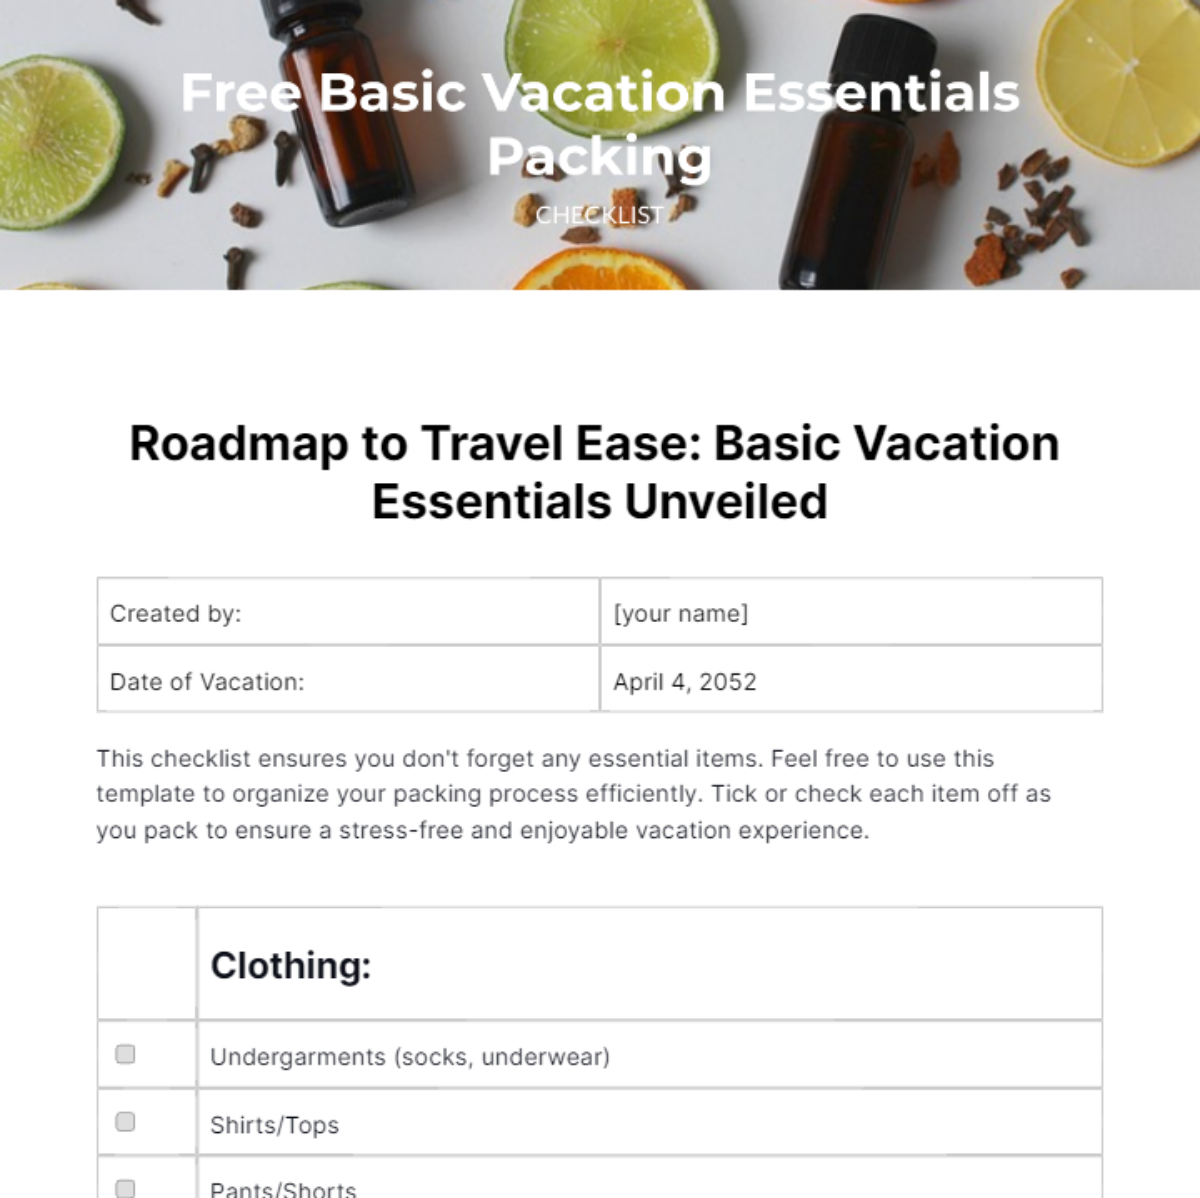 Basic Vacation Essentials Packing Checklist Template